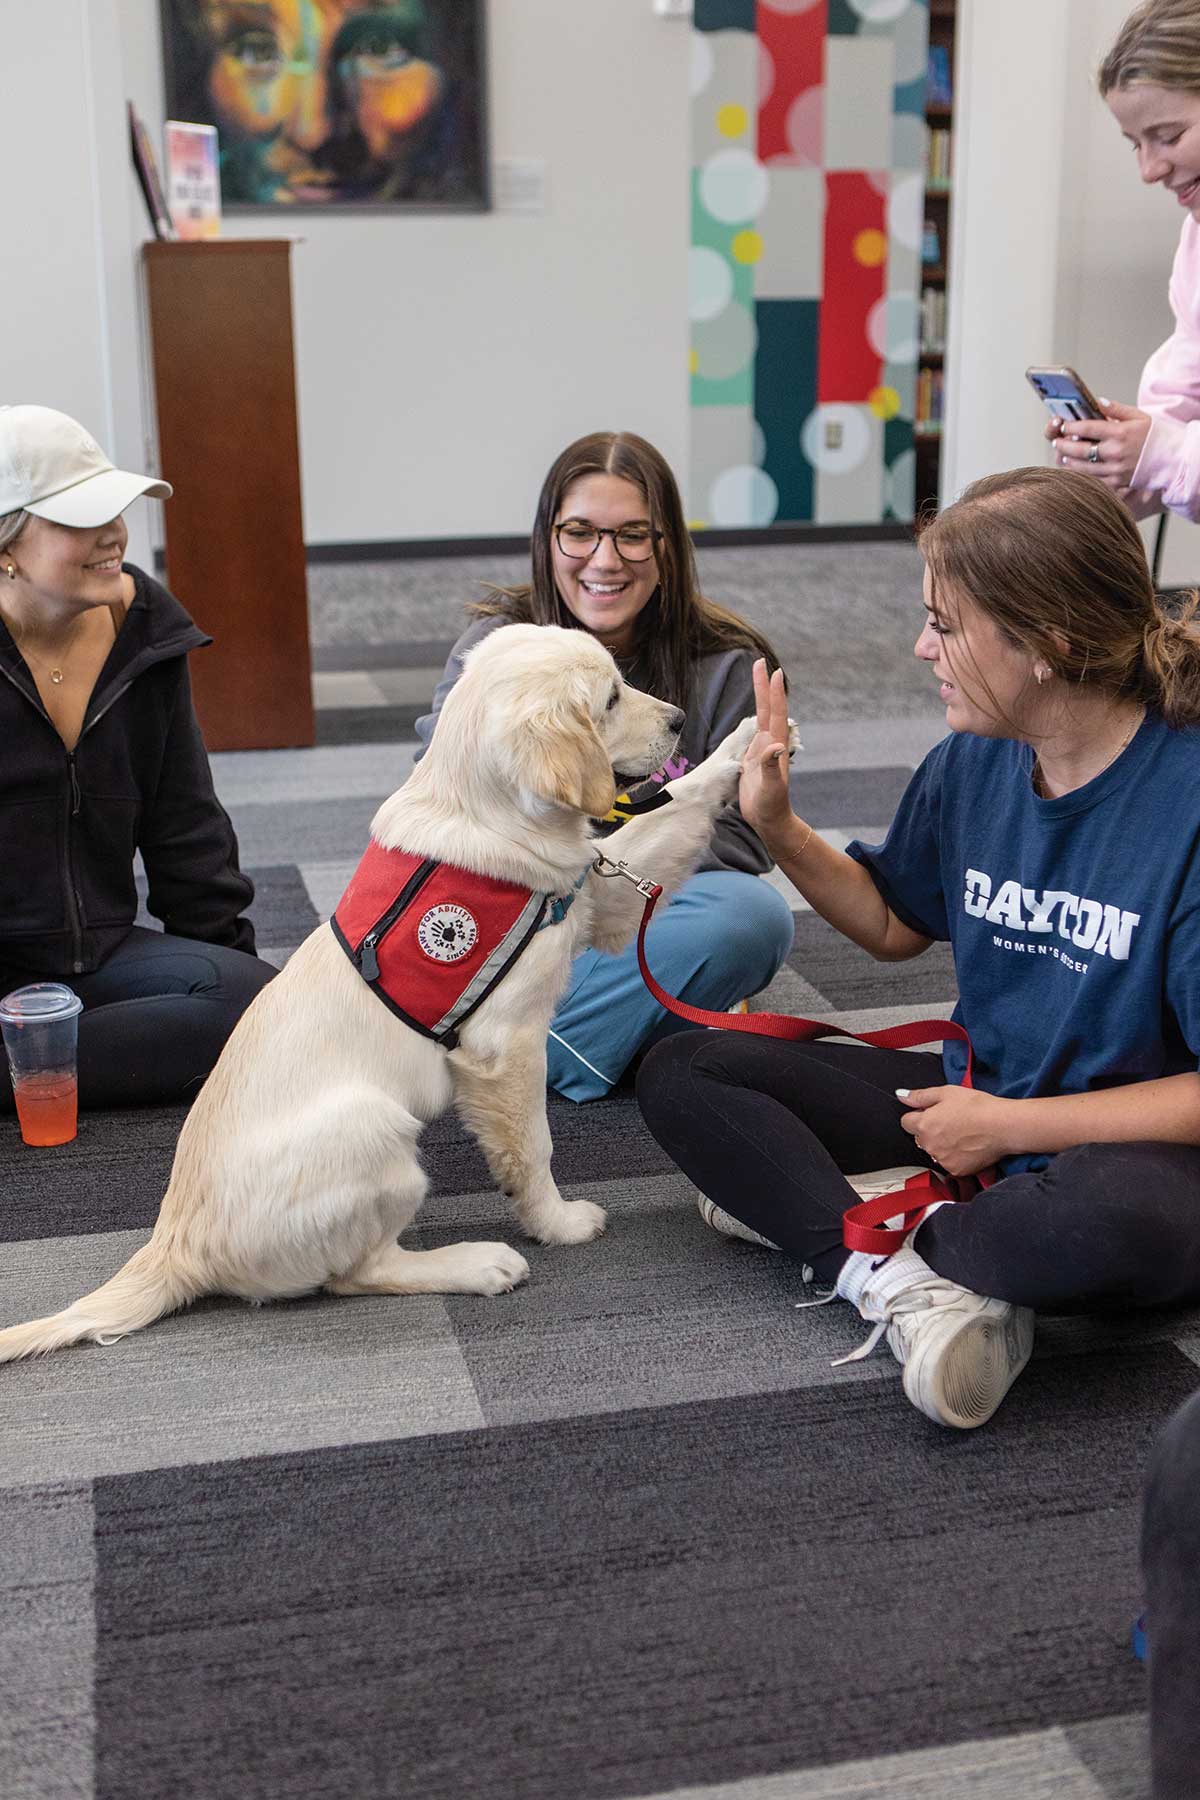 Students sitting around in a circle looking at a golden retriever puppy who is high-fiving one of the students.